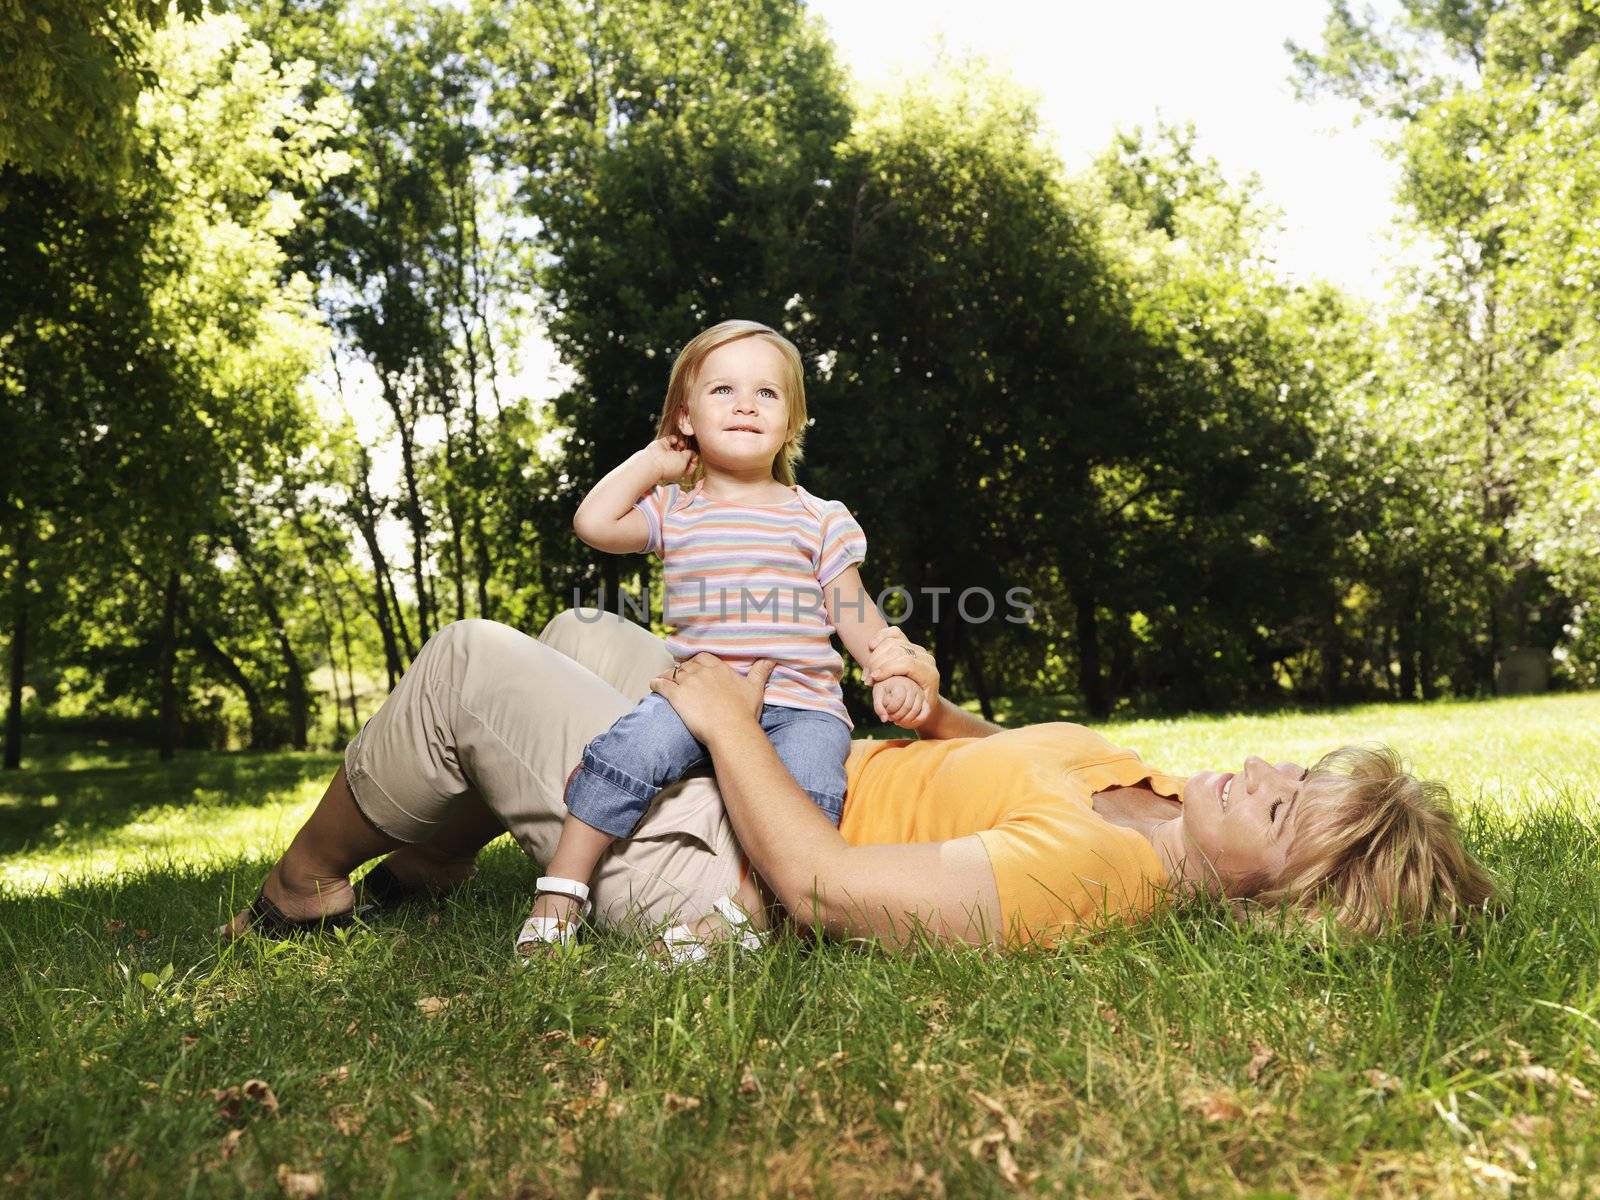 Caucasian mid adult woman lying in grass at park with toddler daughter seated on her lap.